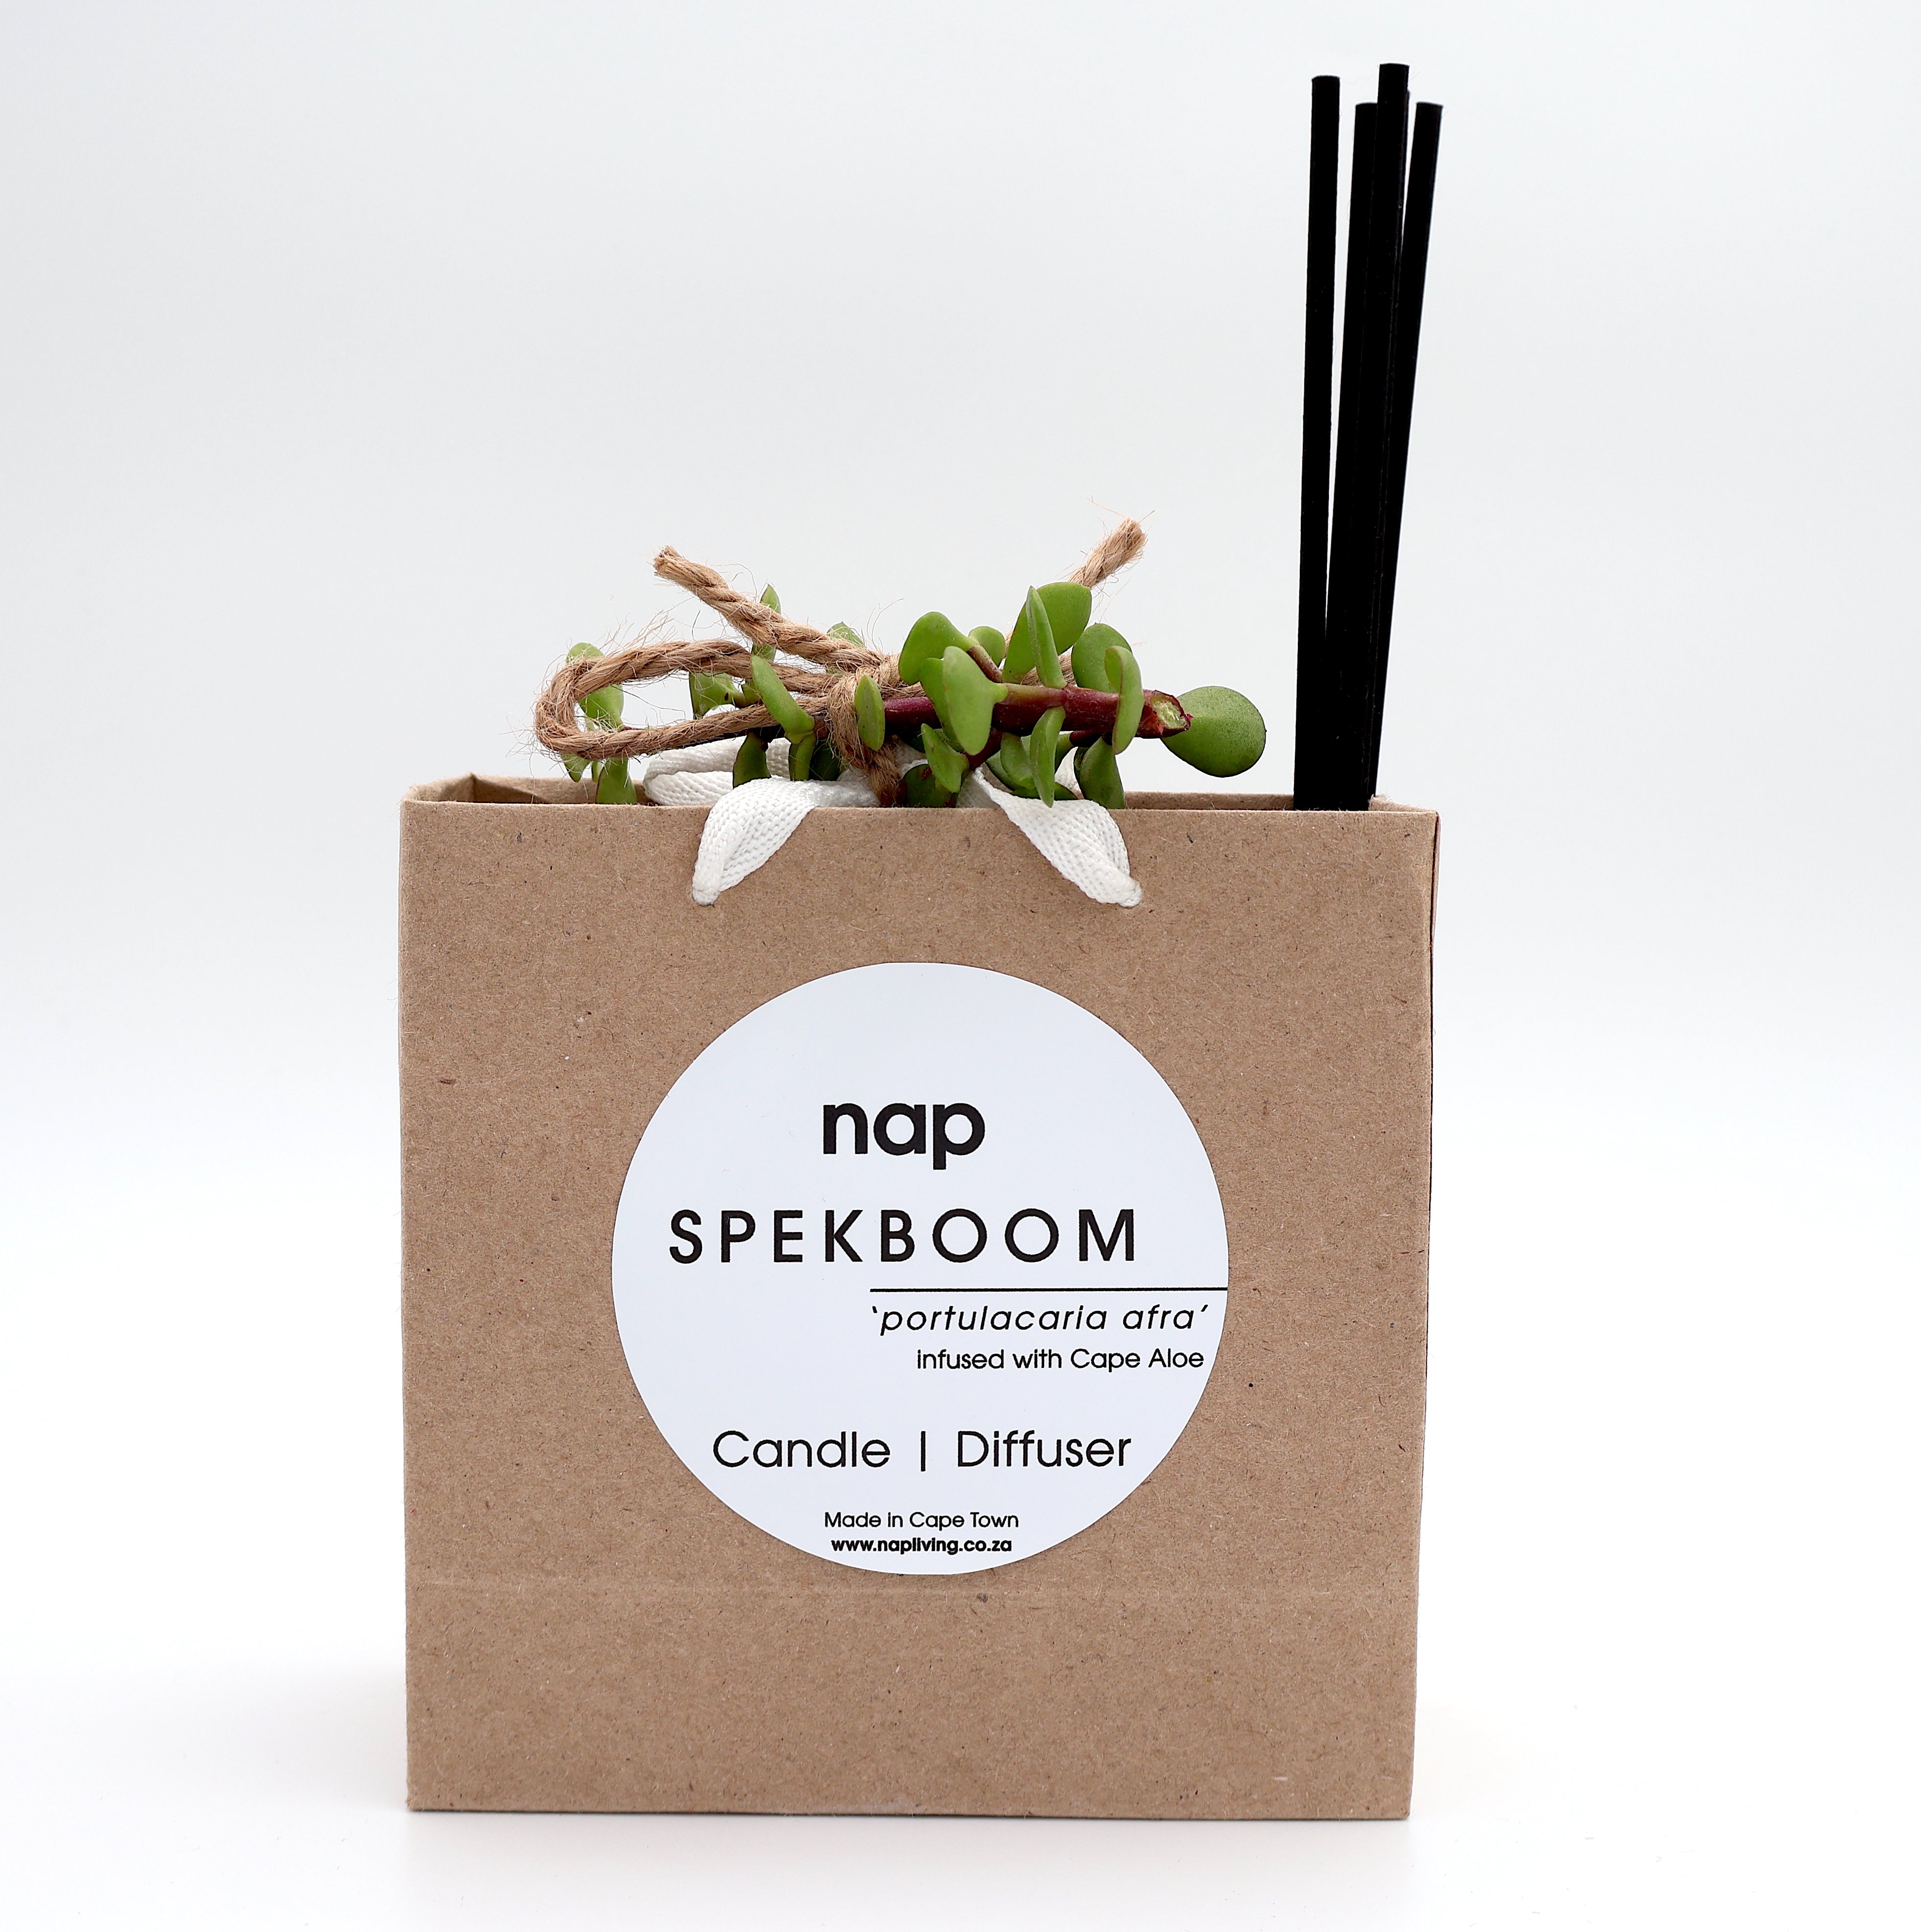 nap SPEKBOOM CANDLE AND DIFFUSER SET